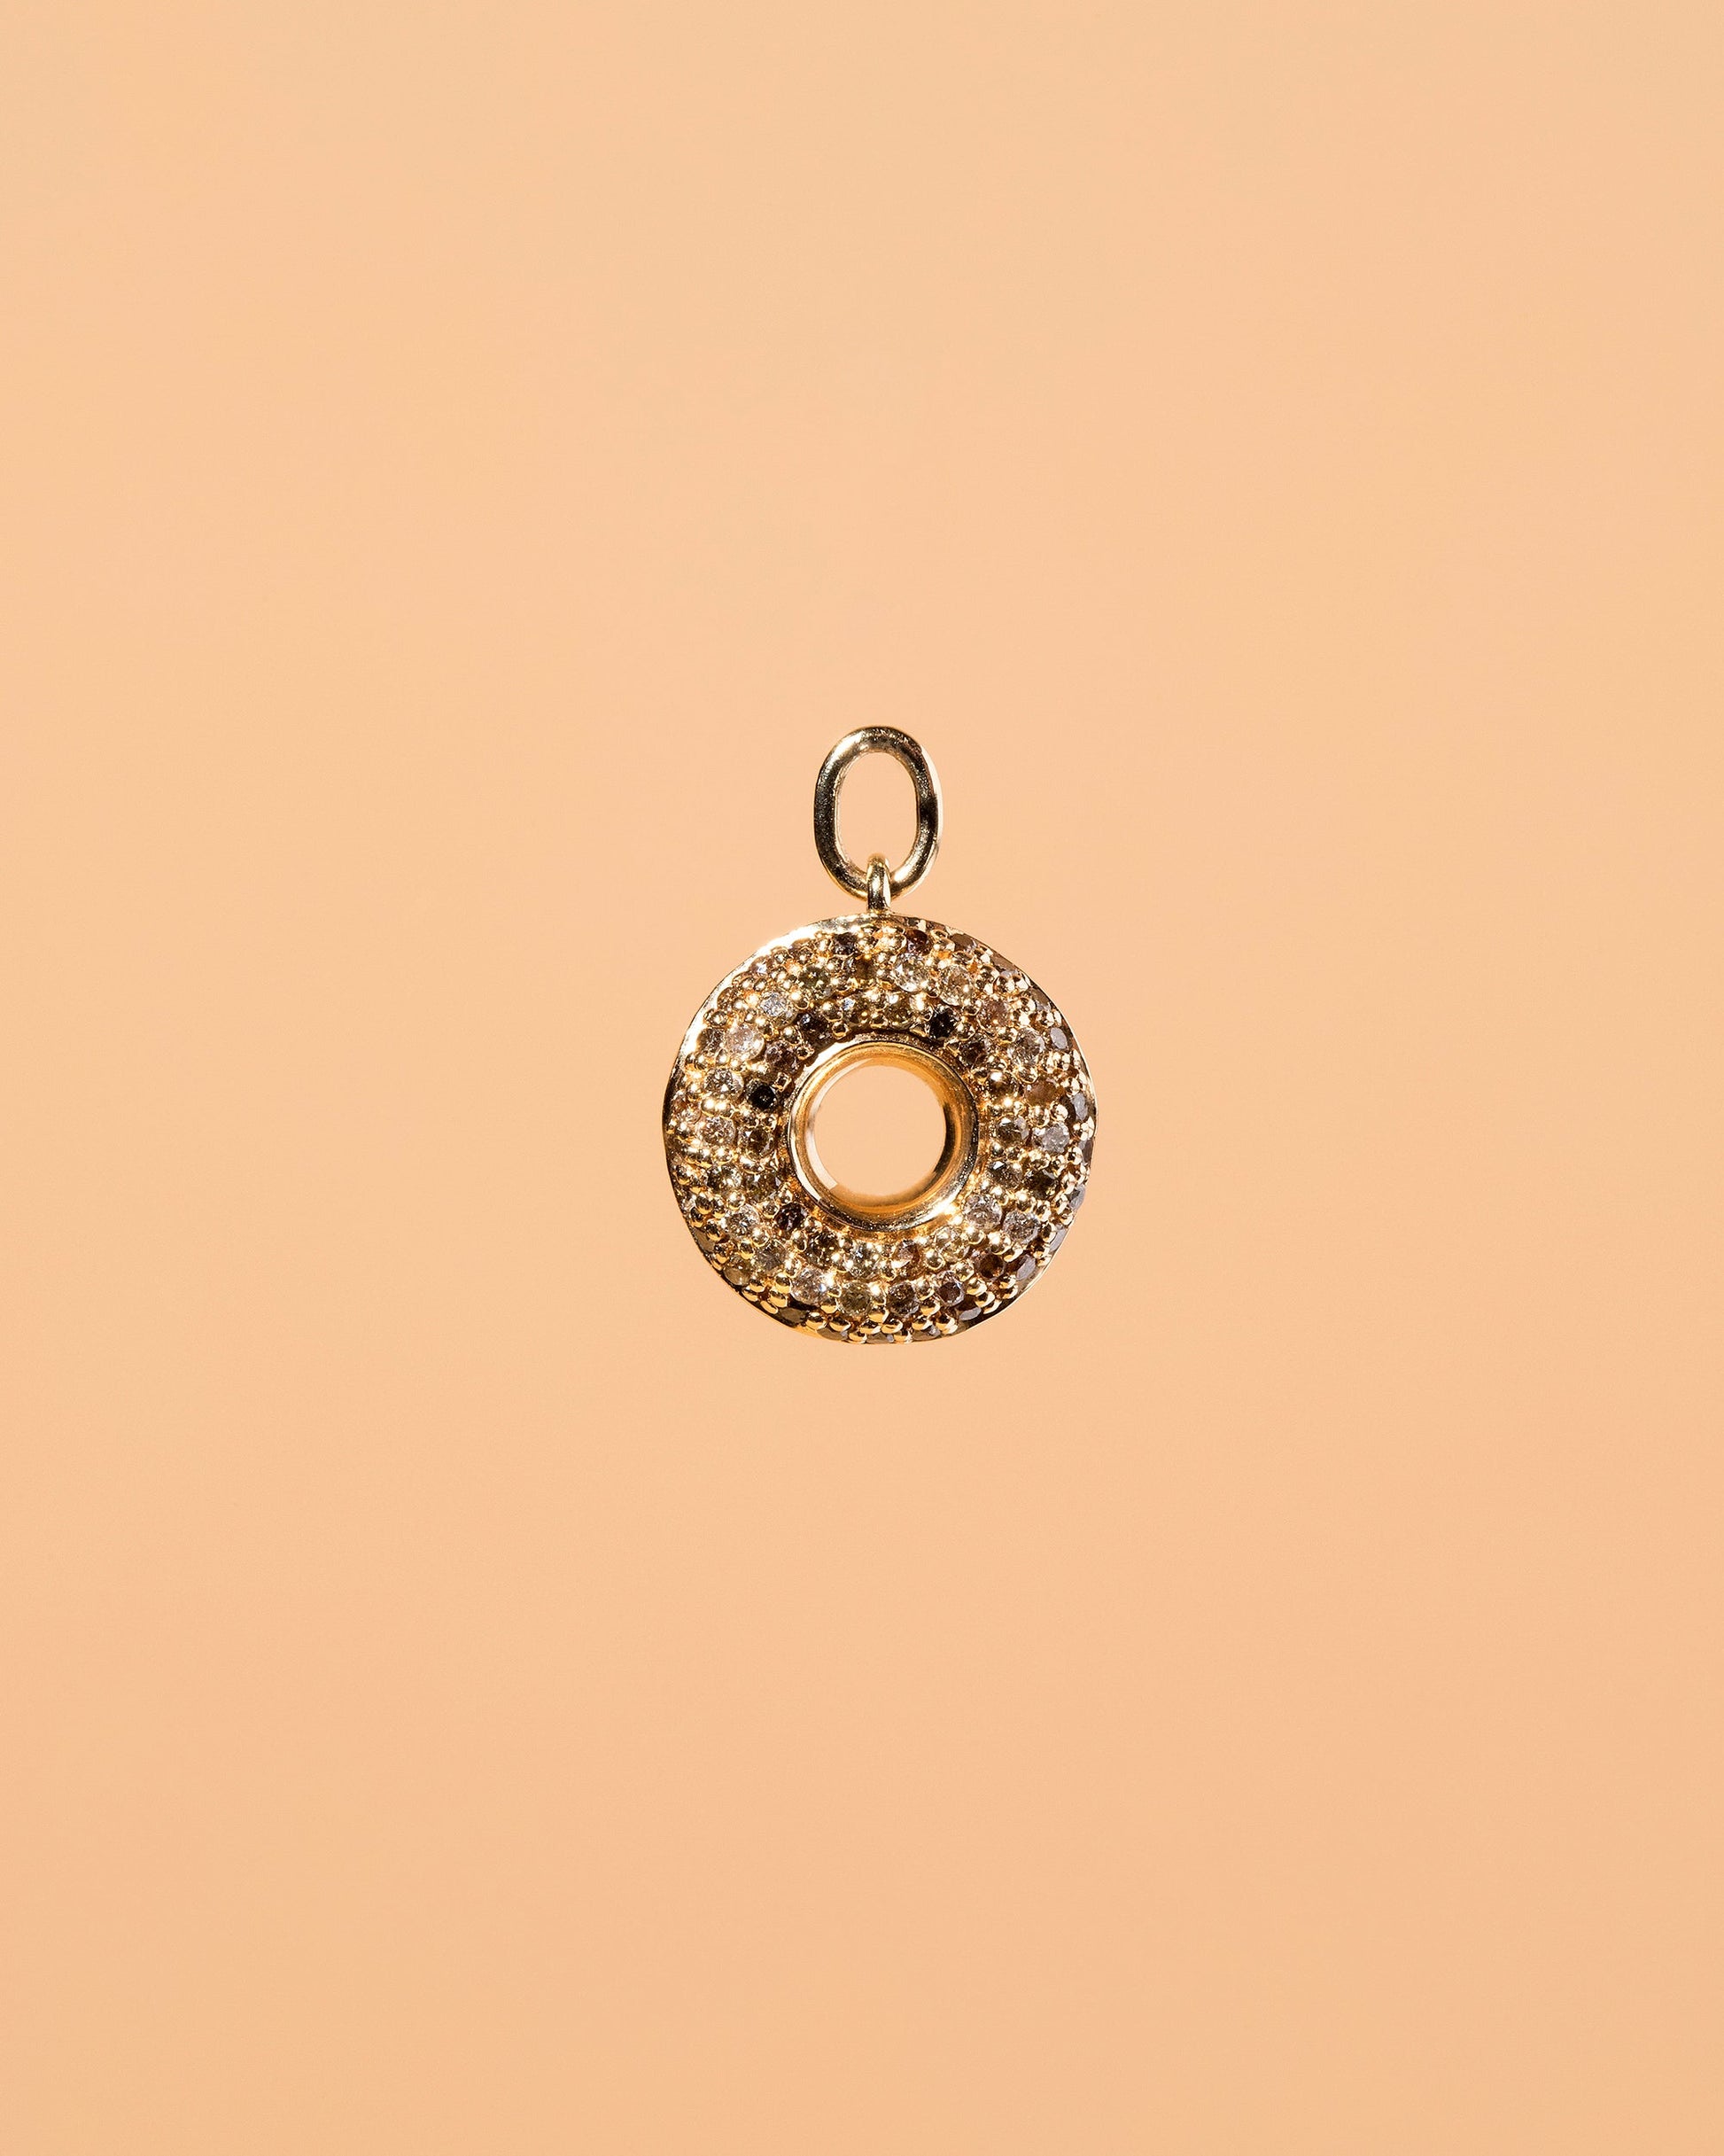  Chocolate Donut Charm - Final Sale on light color background.